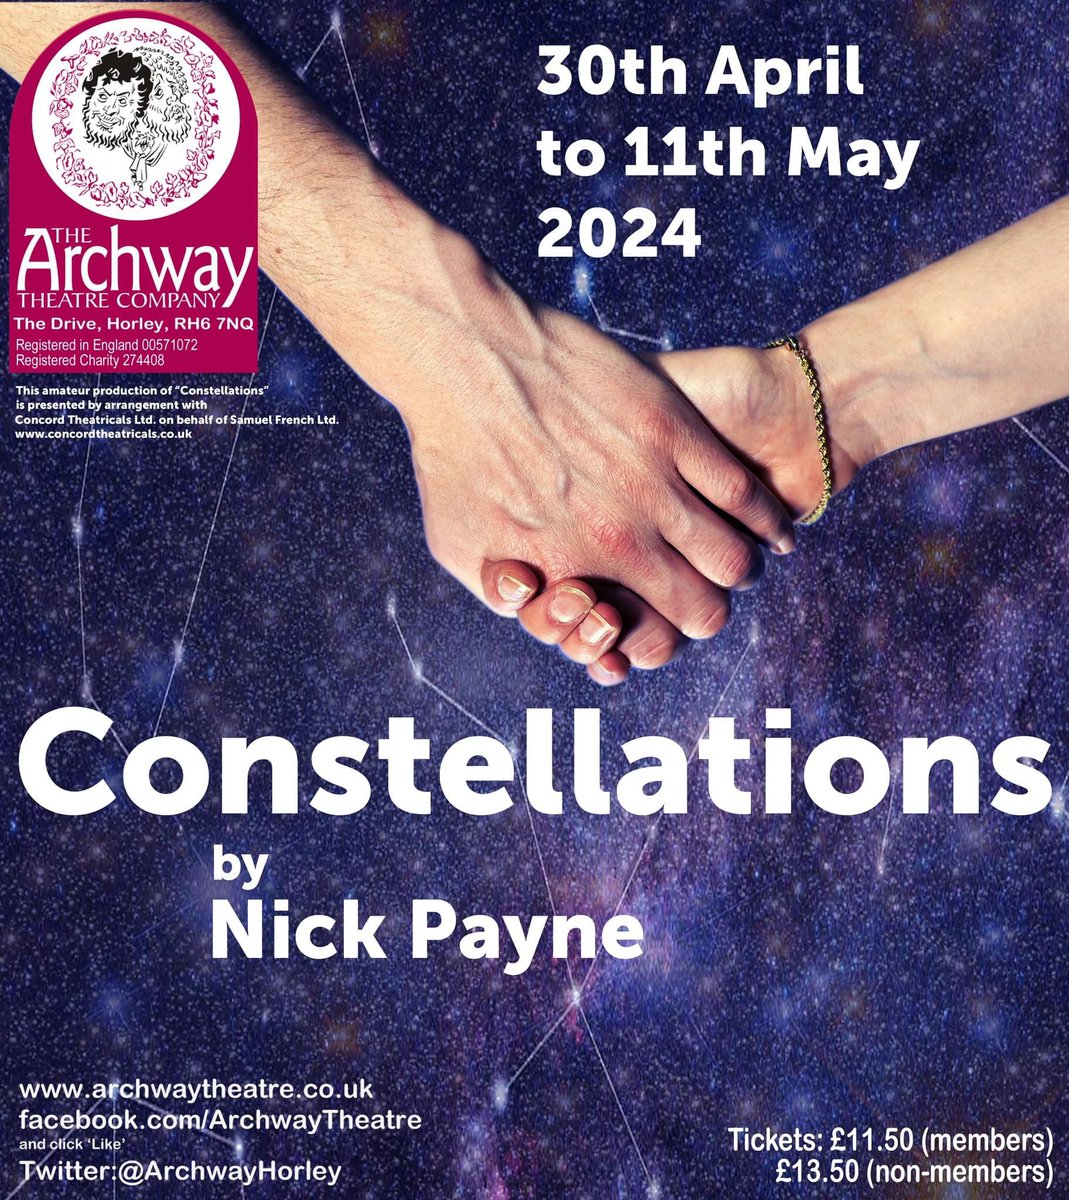 Constellations opens in a few days In the play, we meet a beekeeper and an astrophysicist Tell us: what would your dream job be? Info/🎟️shorturl.at/eDLMZ @PlanetReigate @MeridianFM @BBCSurrey @yourtownreigate @reigate_redhill @reigateuk @Crawley_Obby @SusyRadio @HorleyLife